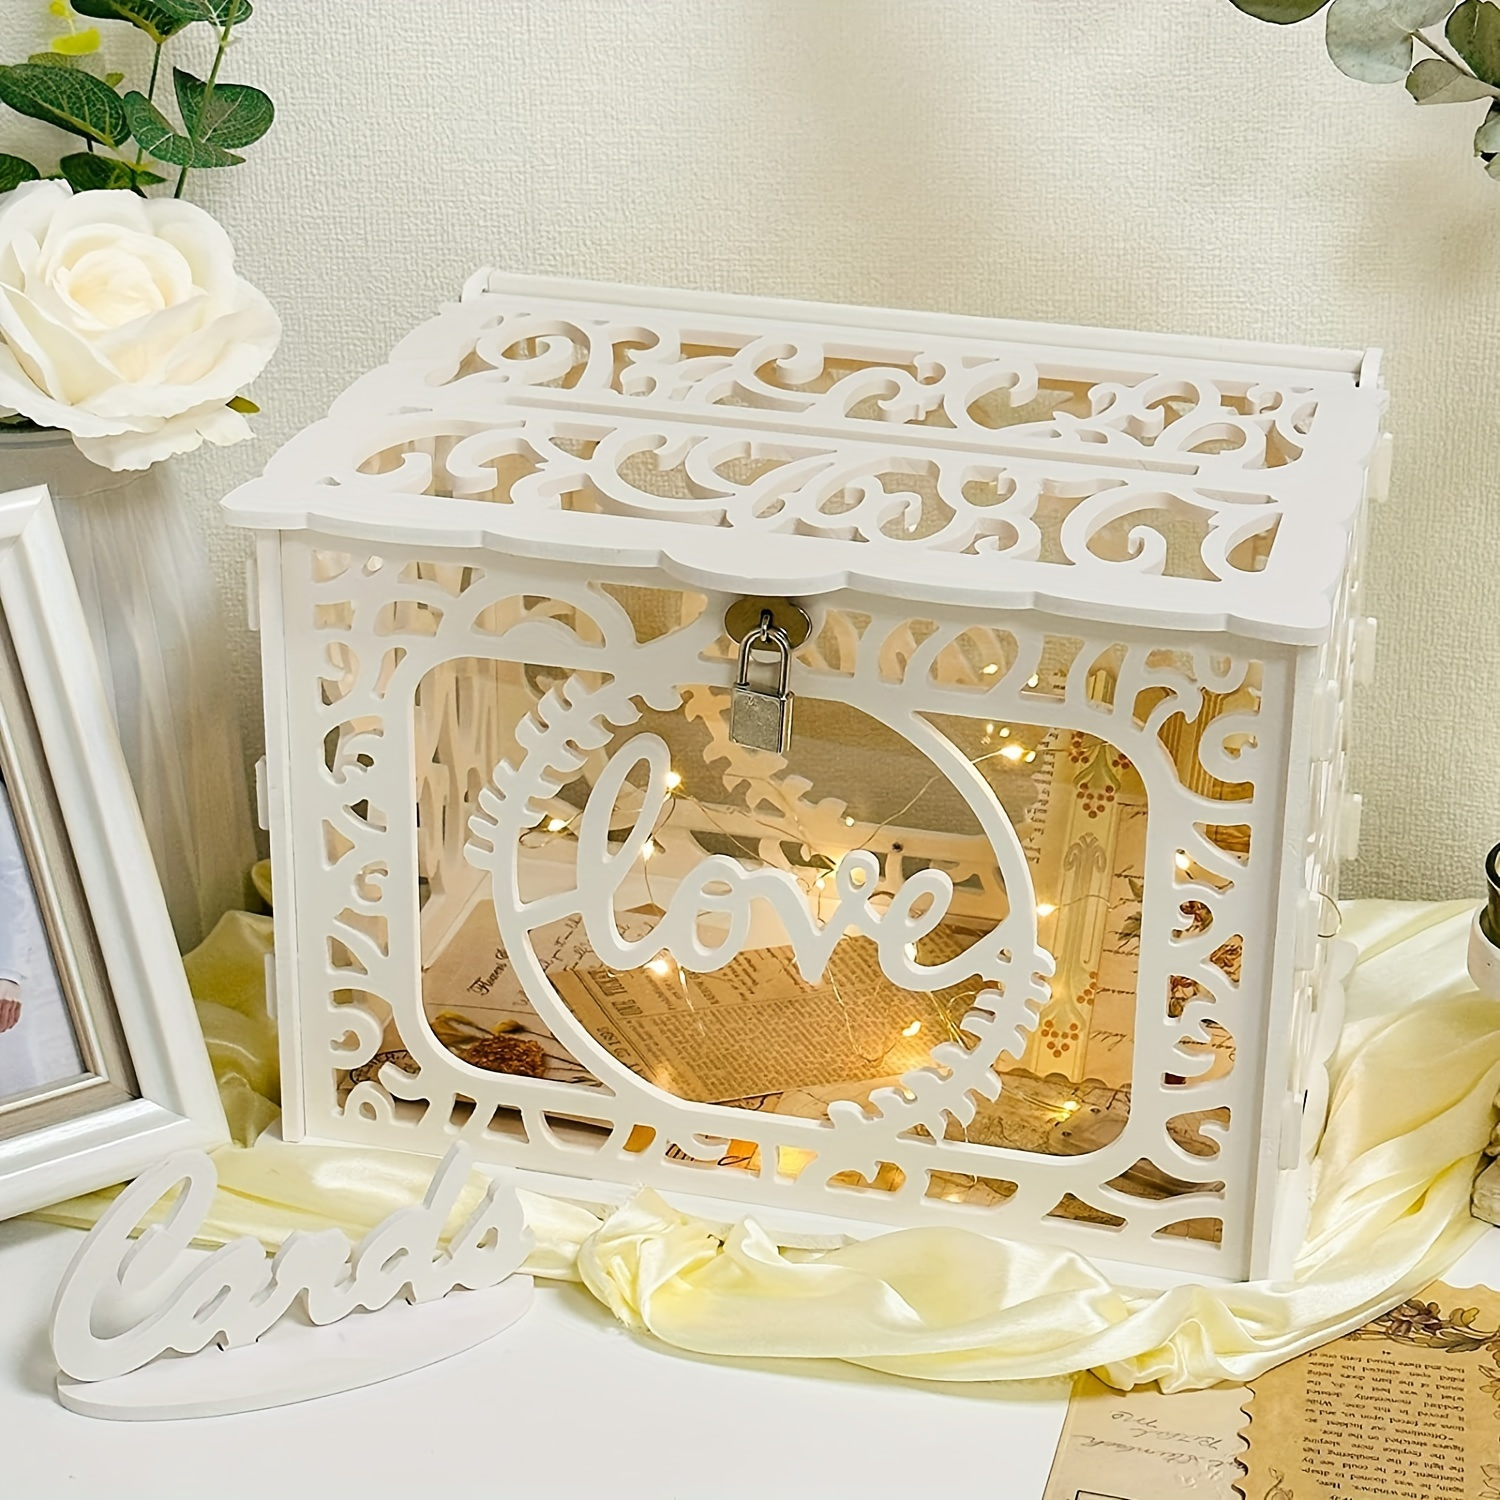 DIY Wedding Card Box with Lock Rustic Wood Card Box Gift Card Holder Card  Box Perfect for Weddings, Baby Showers, Birthdays, Graduations Hold up 225  Cards 